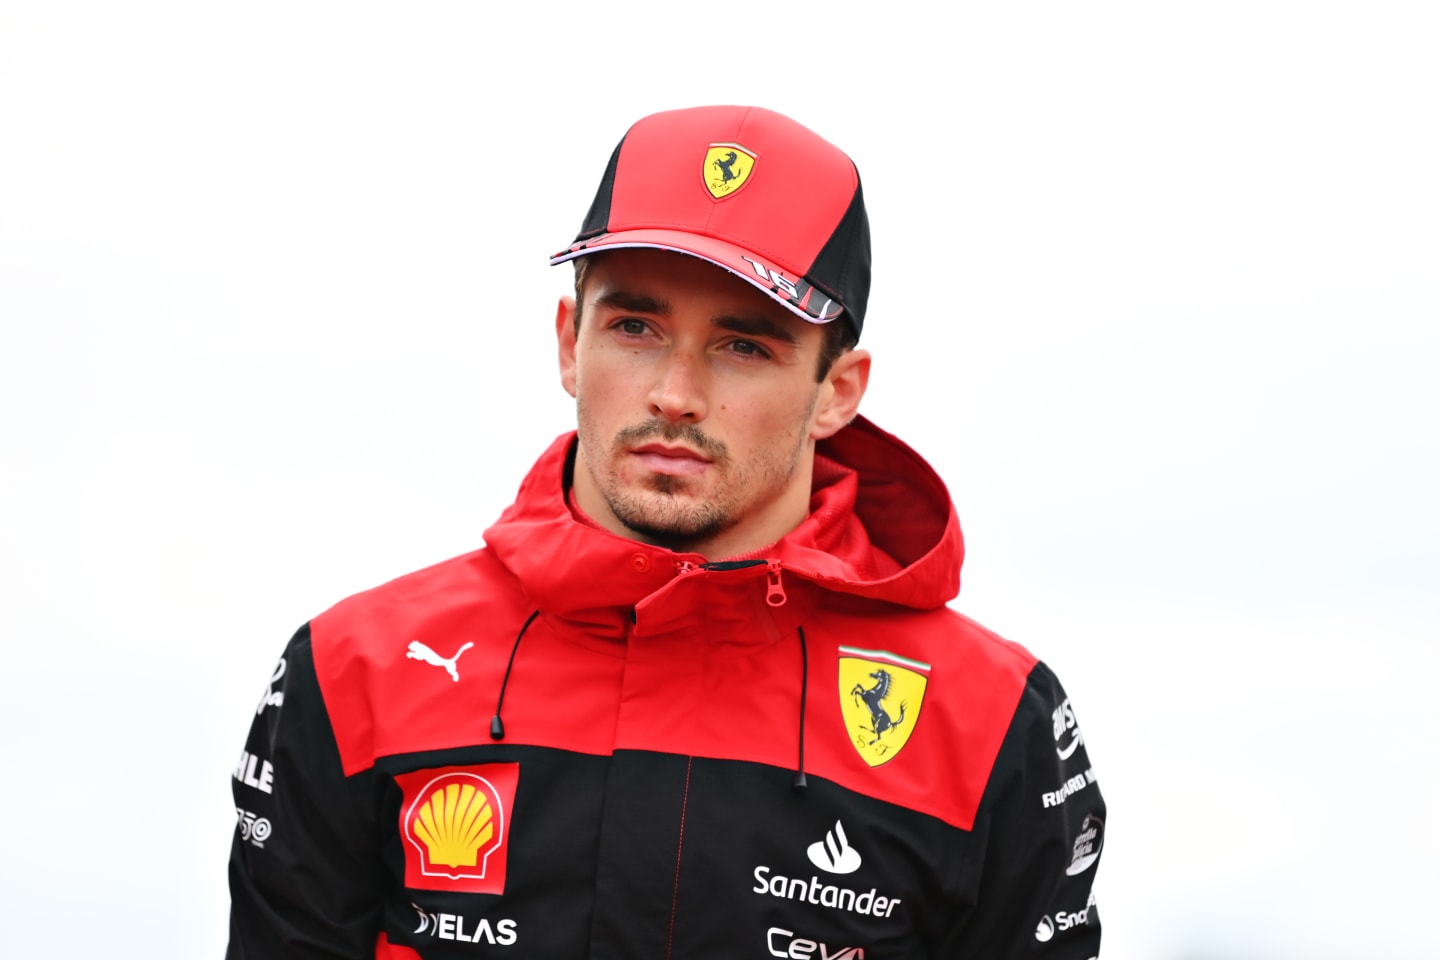 NORTHAMPTON, ENGLAND - JULY 03: Charles Leclerc of Monaco and Ferrari looks on on the grid prior to